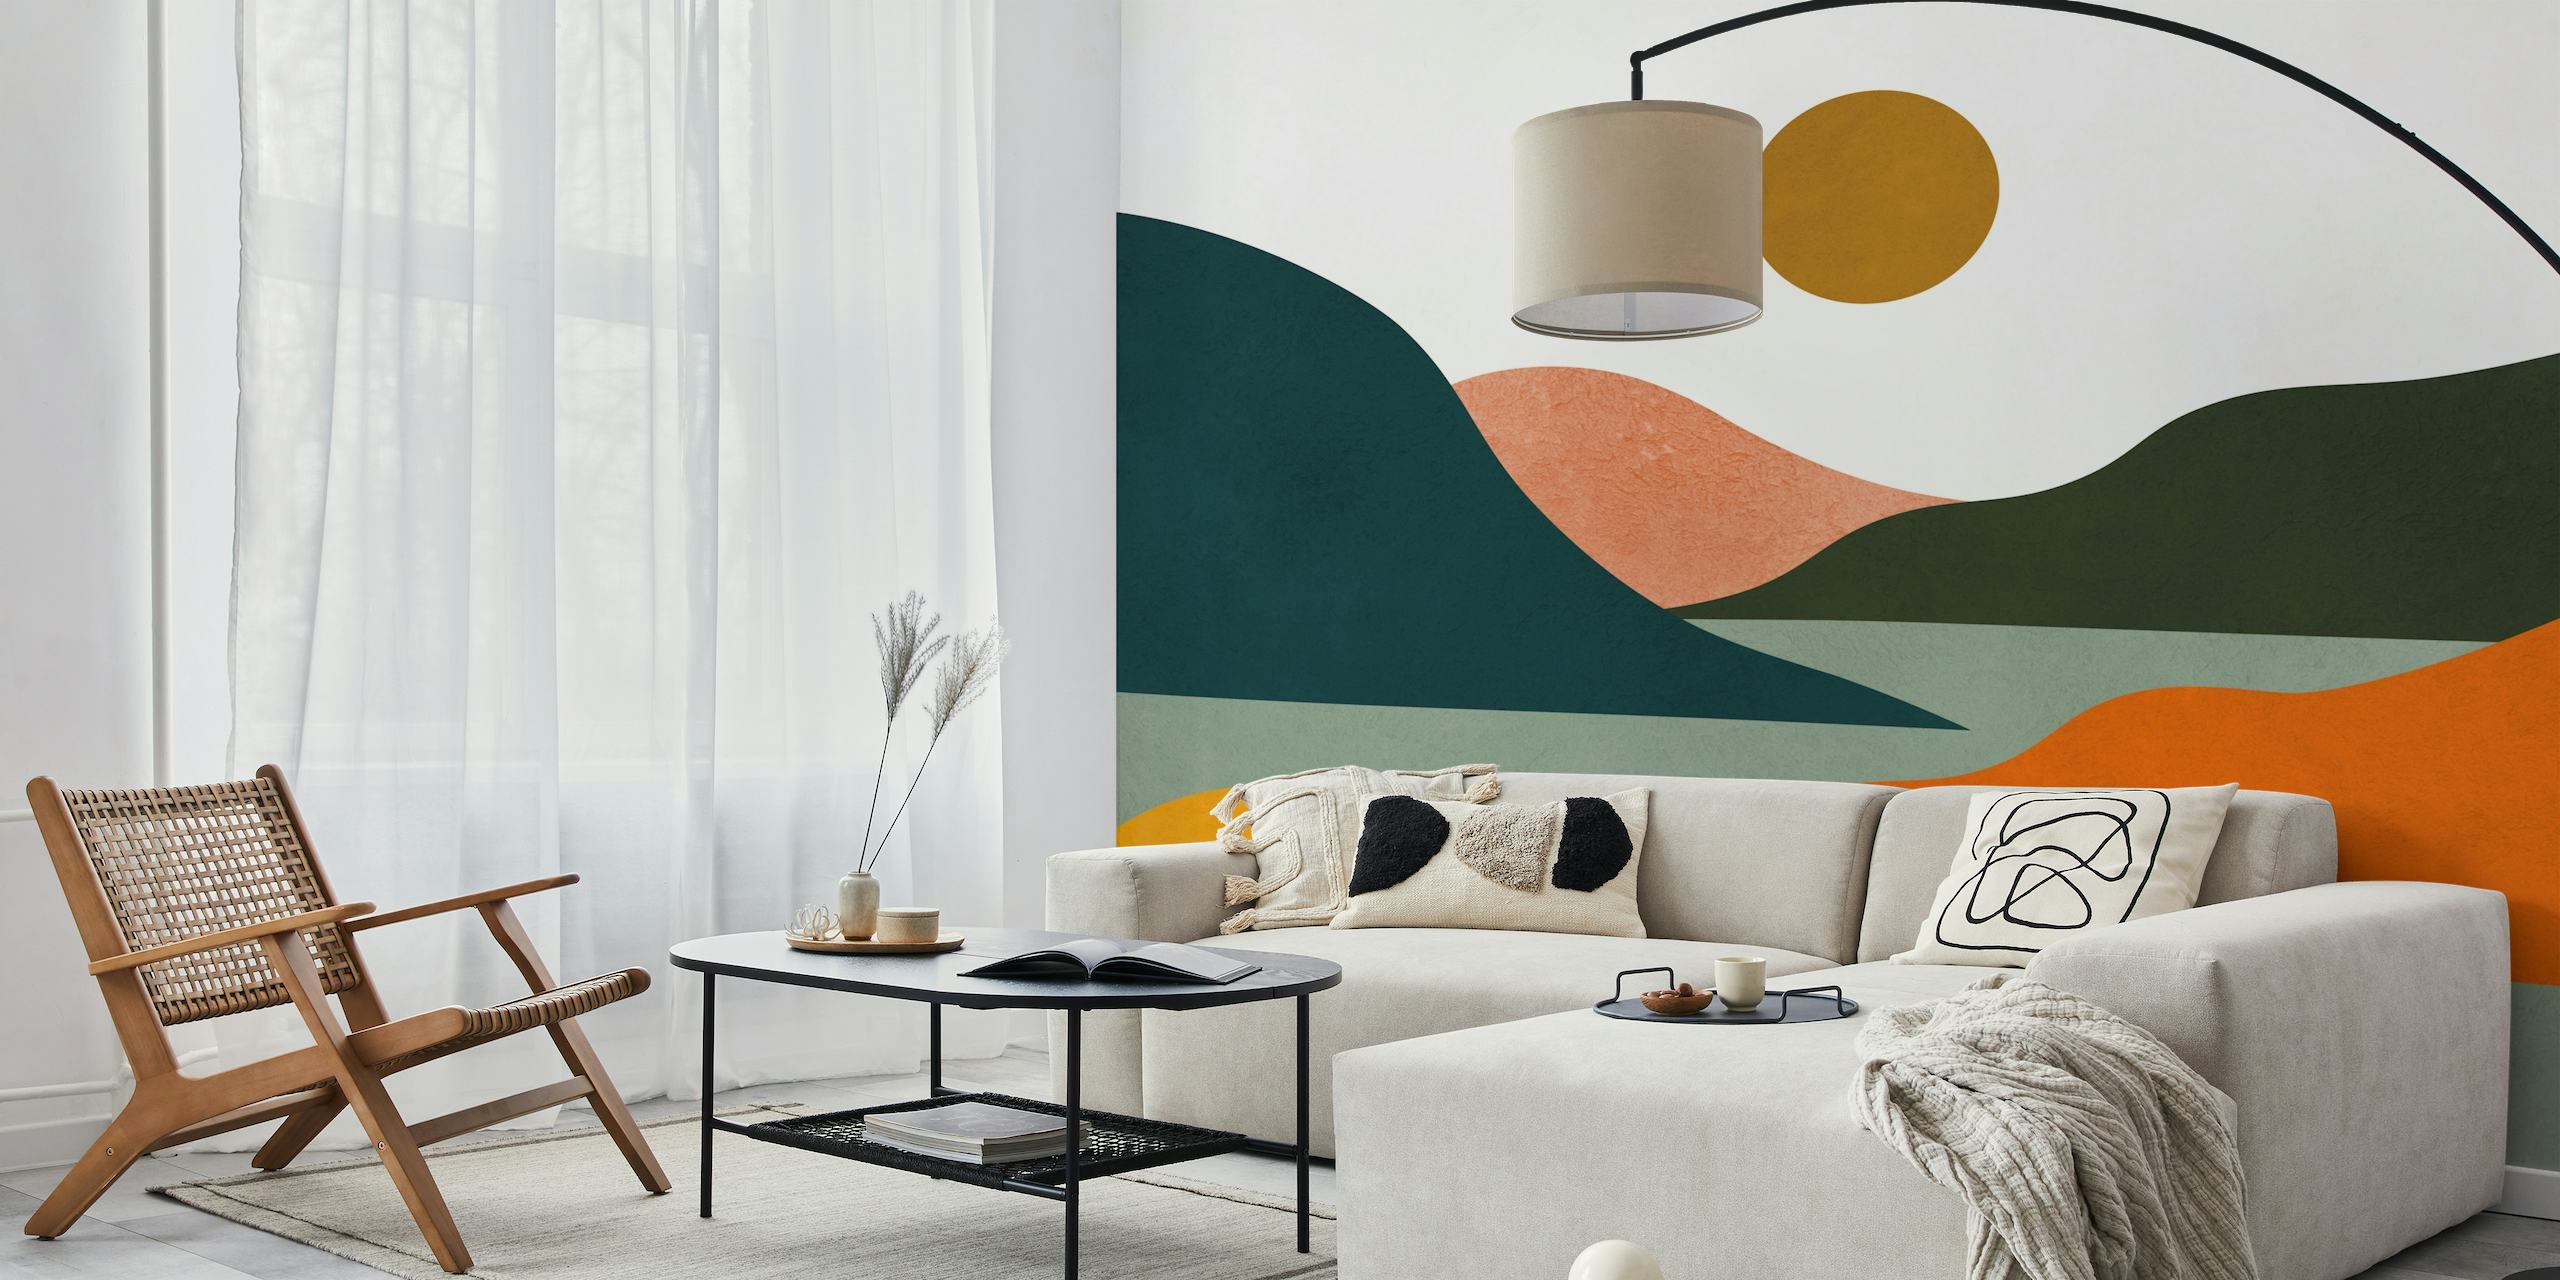 Watercolor landscape wall mural with abstract hills, sun, and lake